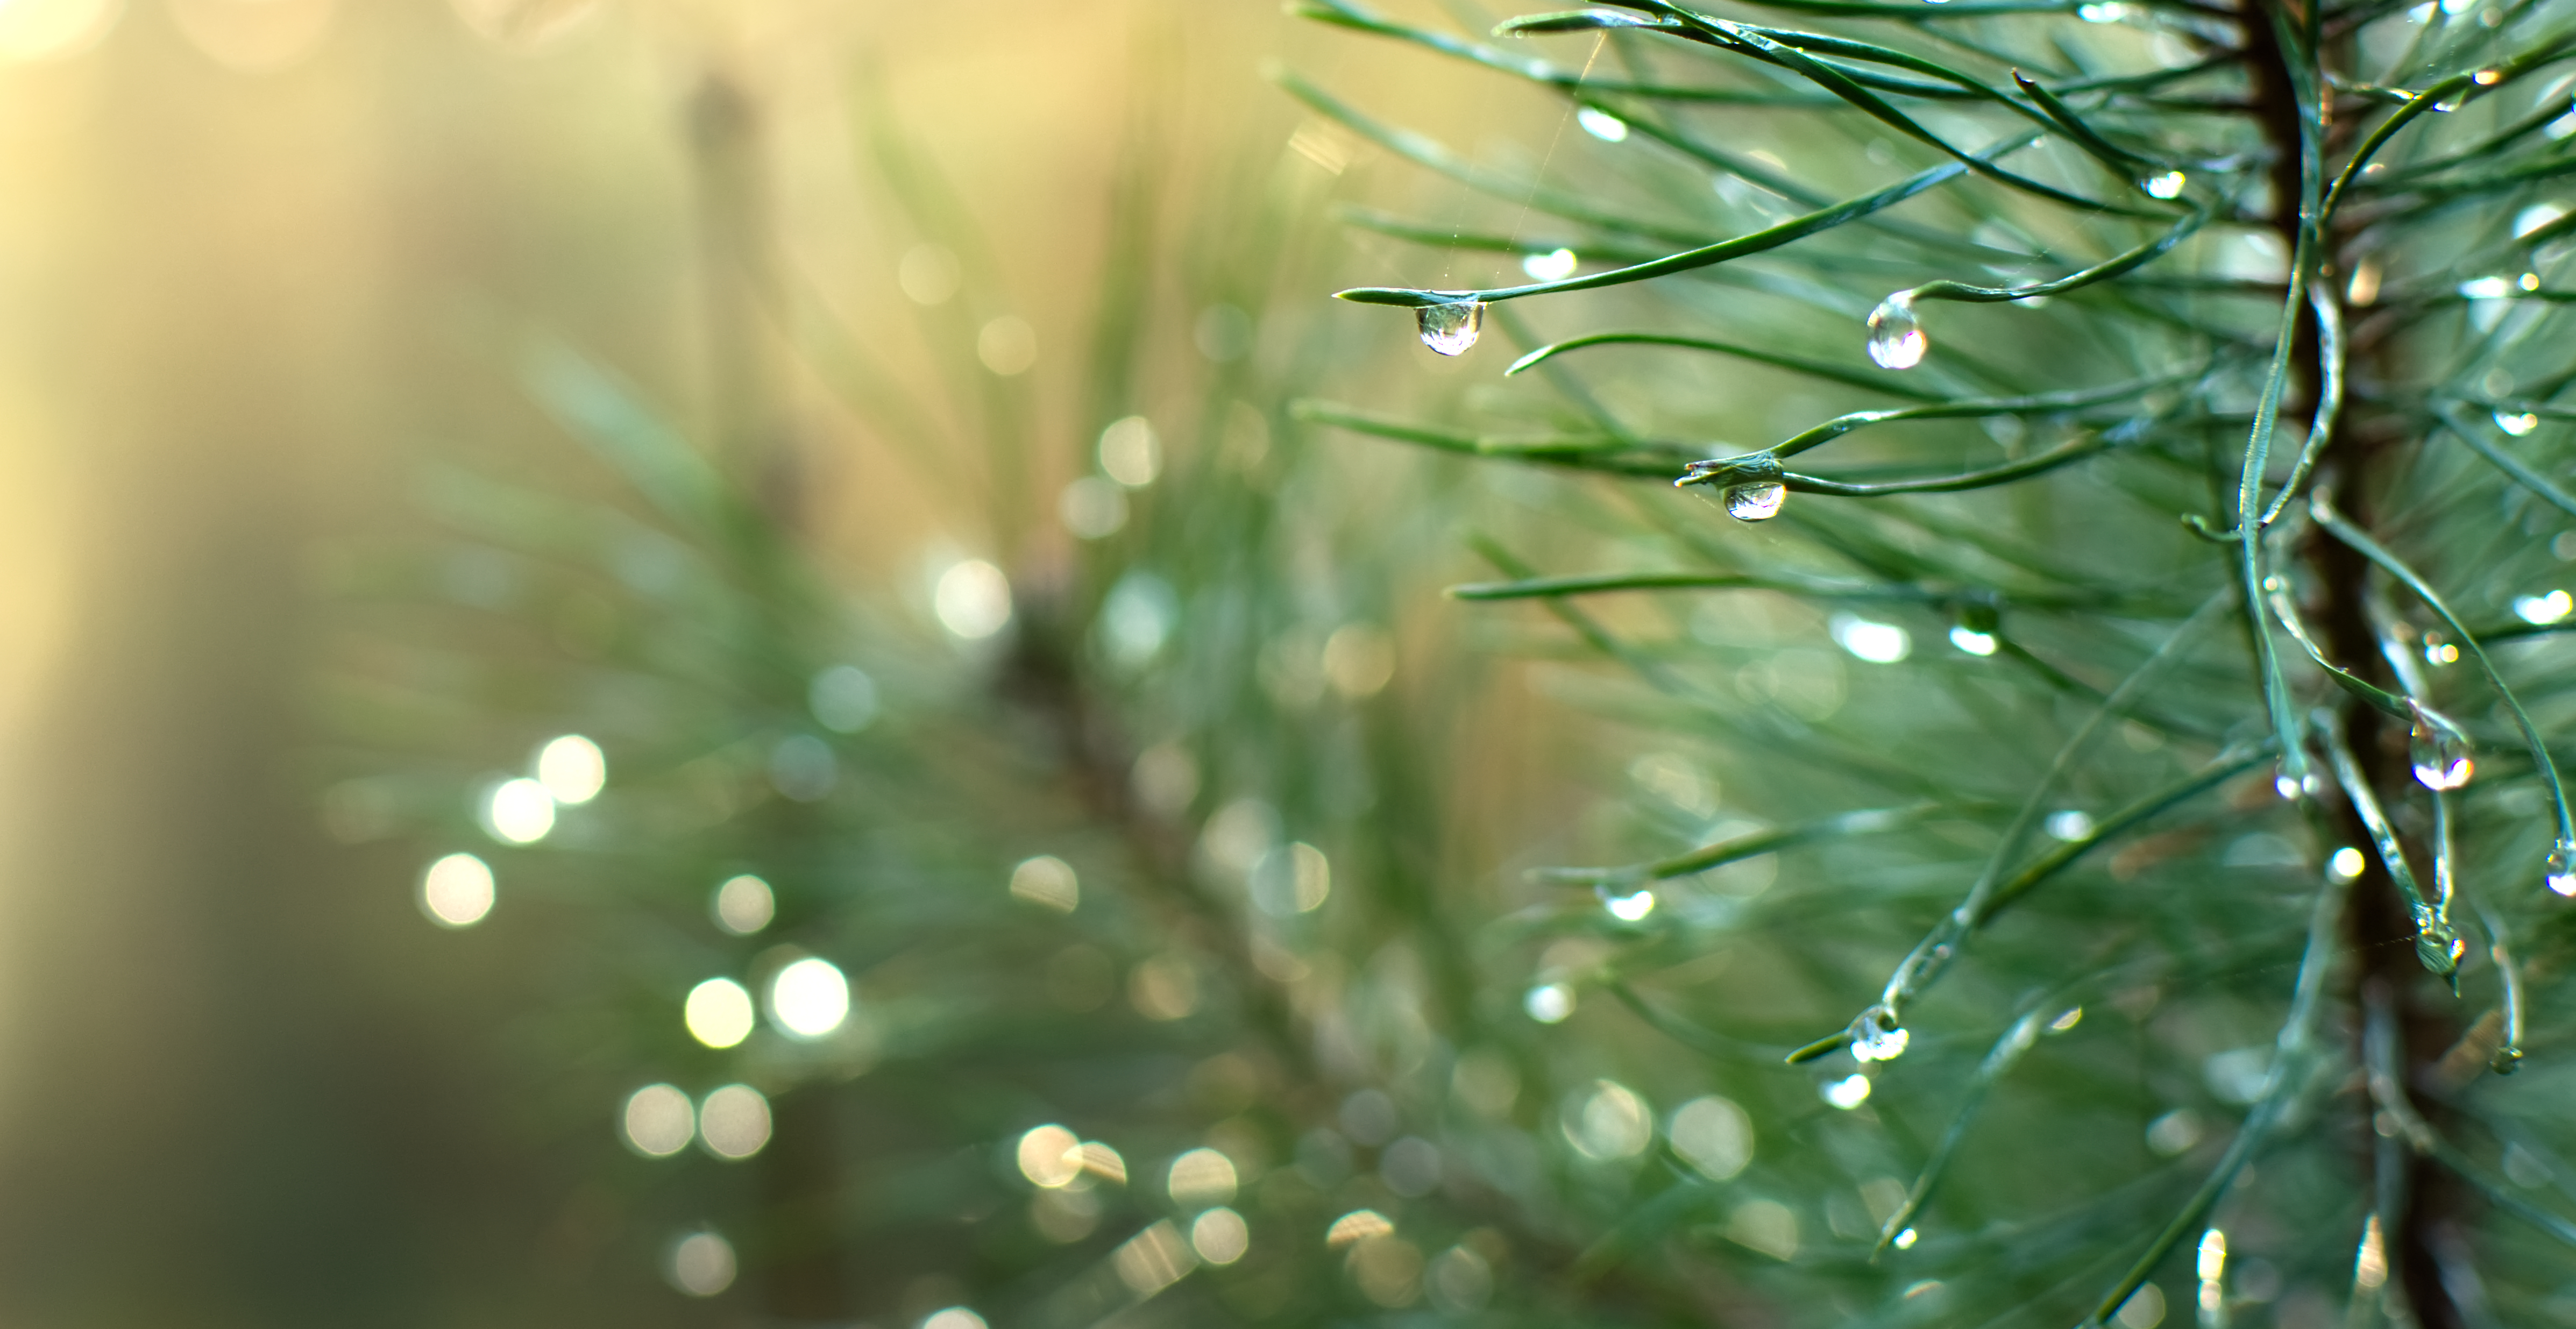 Pine bark extract may protect skin from seasonal changes